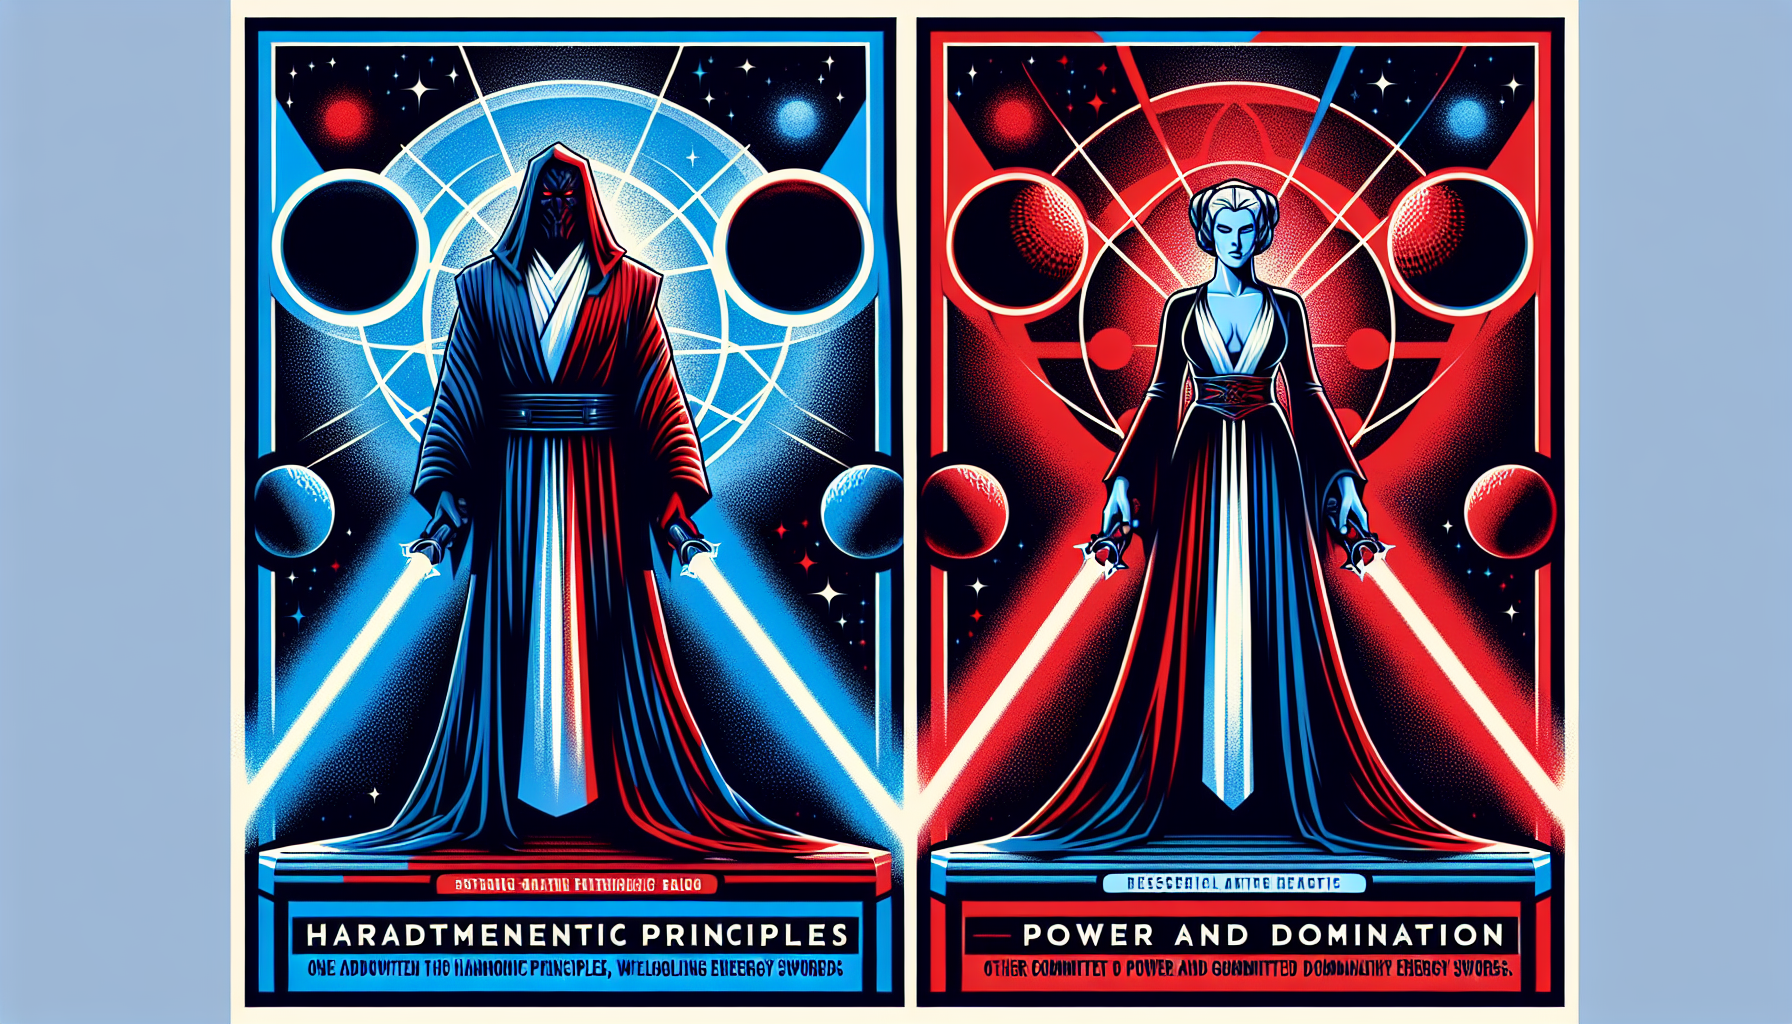 Illustration of two fictional galactic factions representing contrasting philosophies: one adhering to harmonious principles, depicted in blue robes wielding glowing energy swords, and the other committed to power and domination, dressed in black with red energy blades. Referencing the stylistic aesthetics of a classic space opera saga, present the colors in a vivid and contemporary manner. Note that no text should be present in the image, only the visual representation of these philosophical differences.